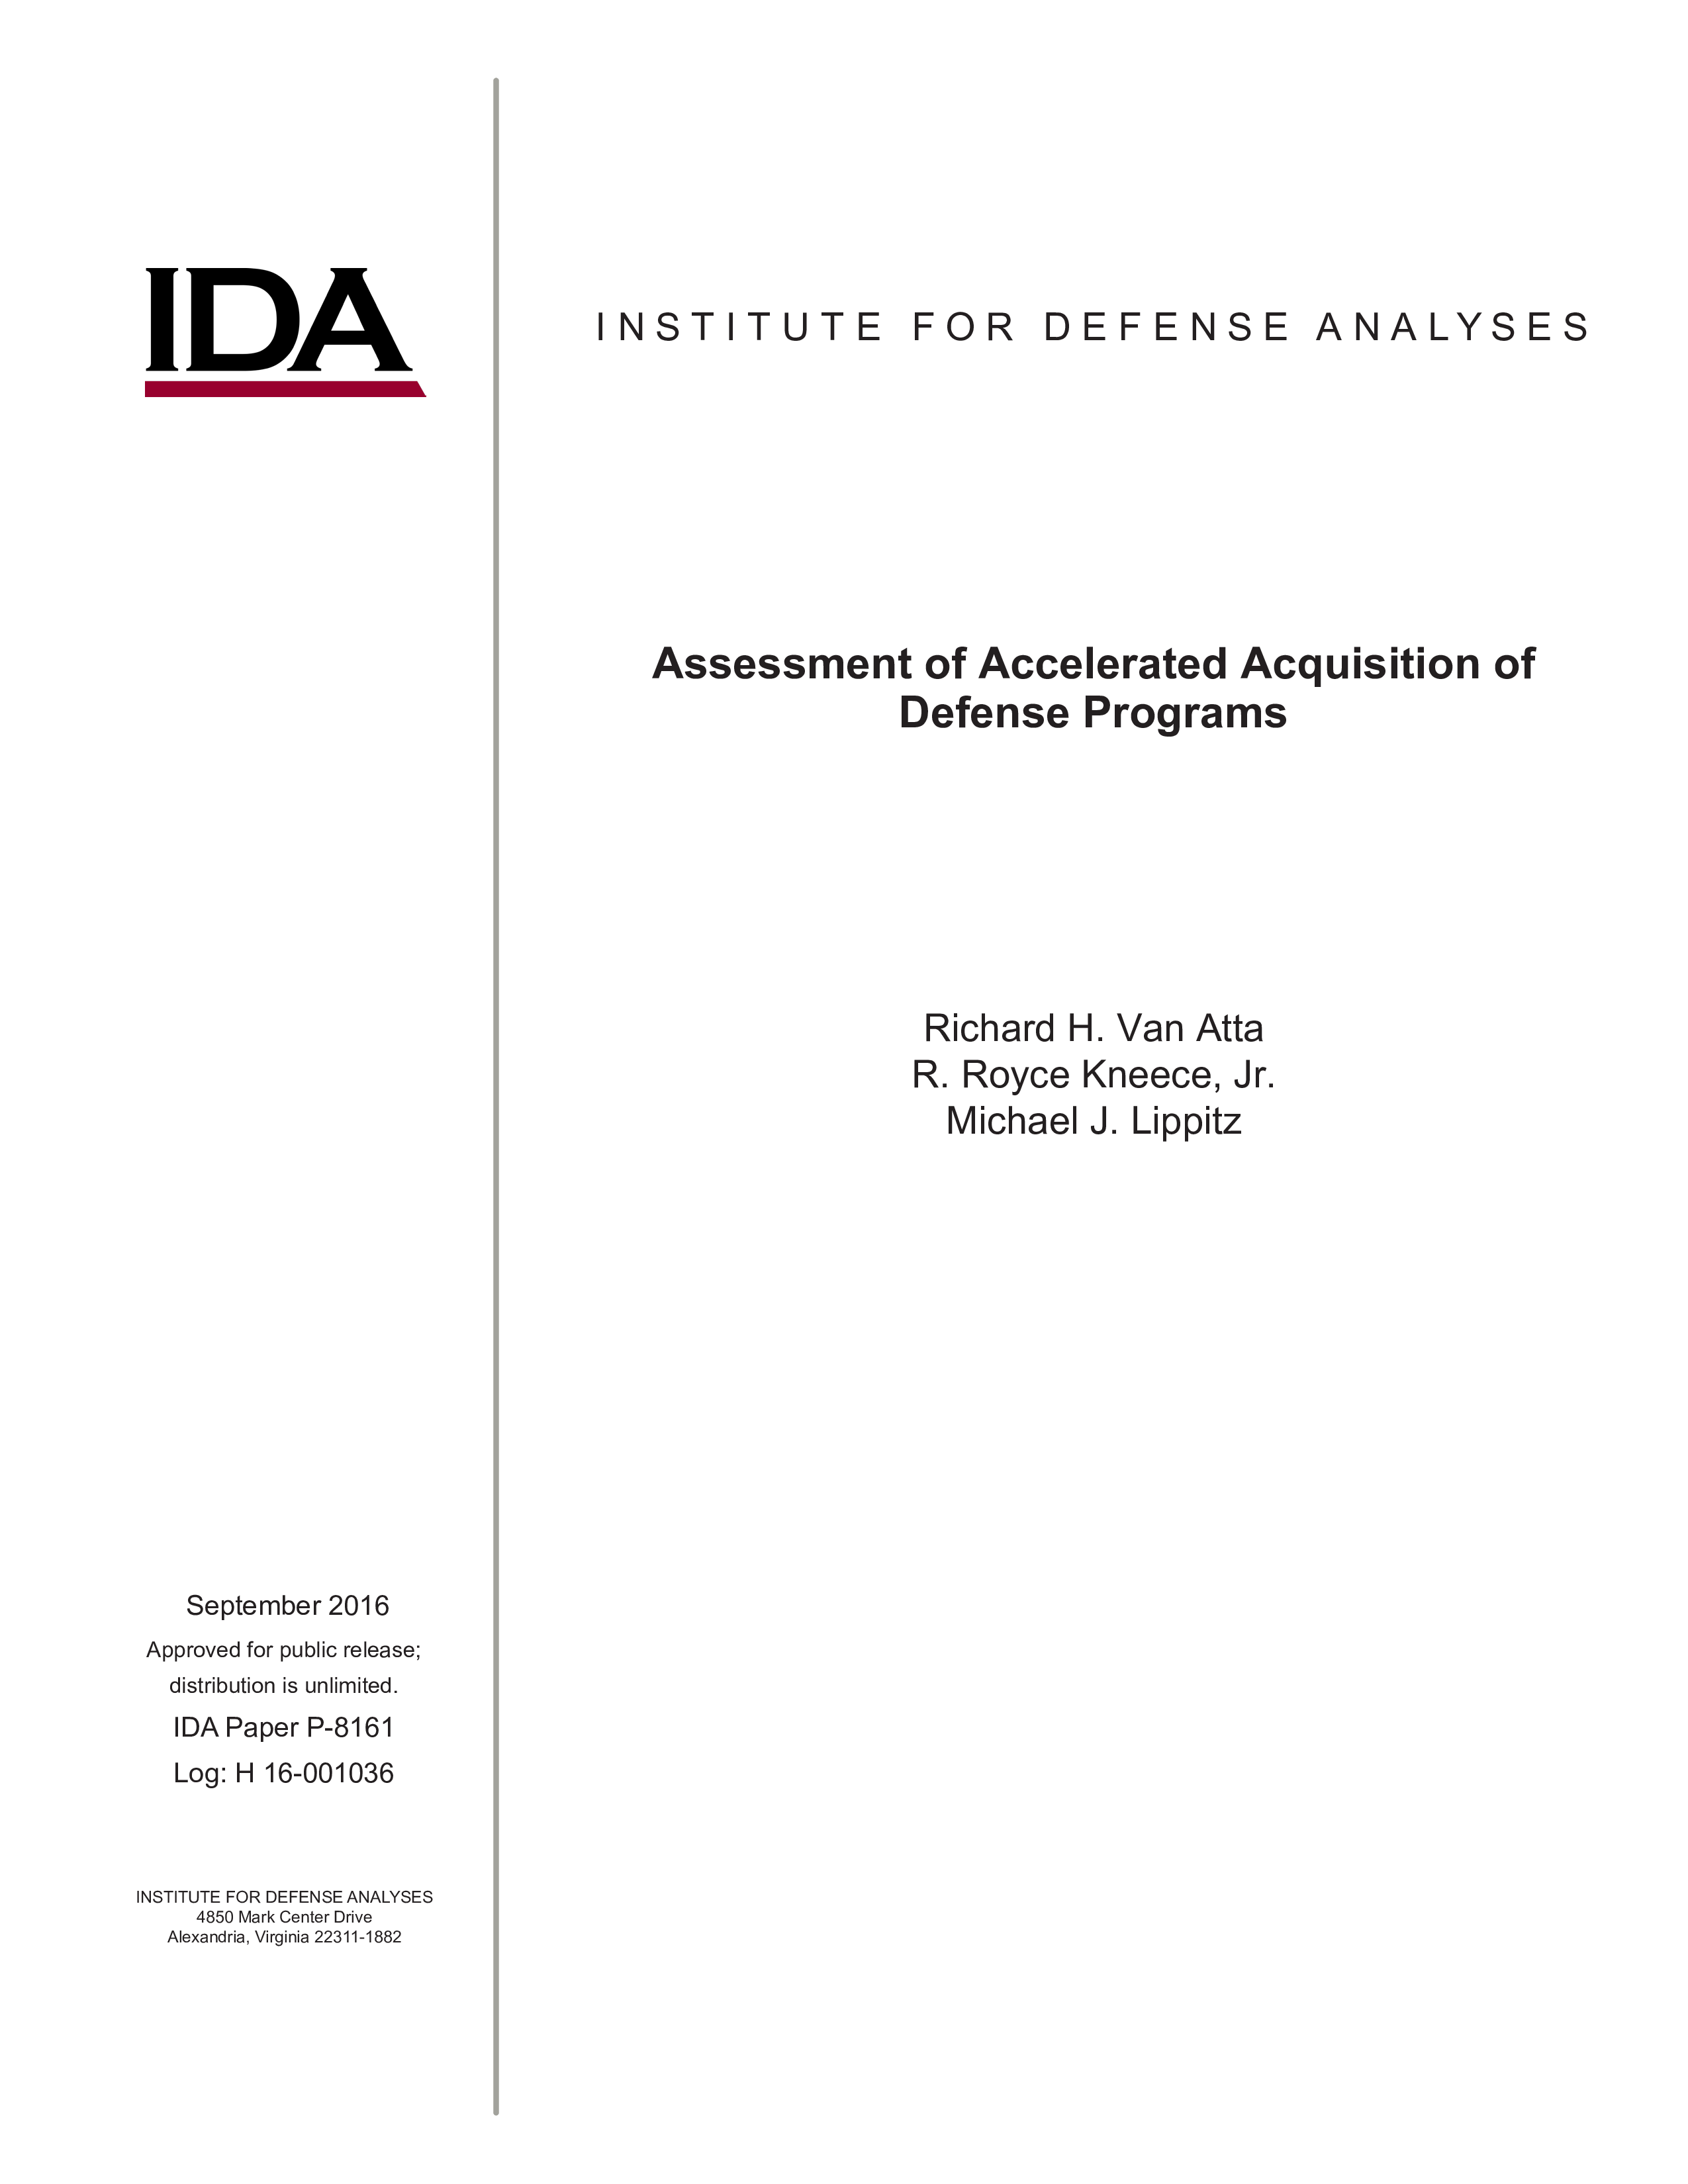 Assessment of Accelerated Acquisition of Defense Programs